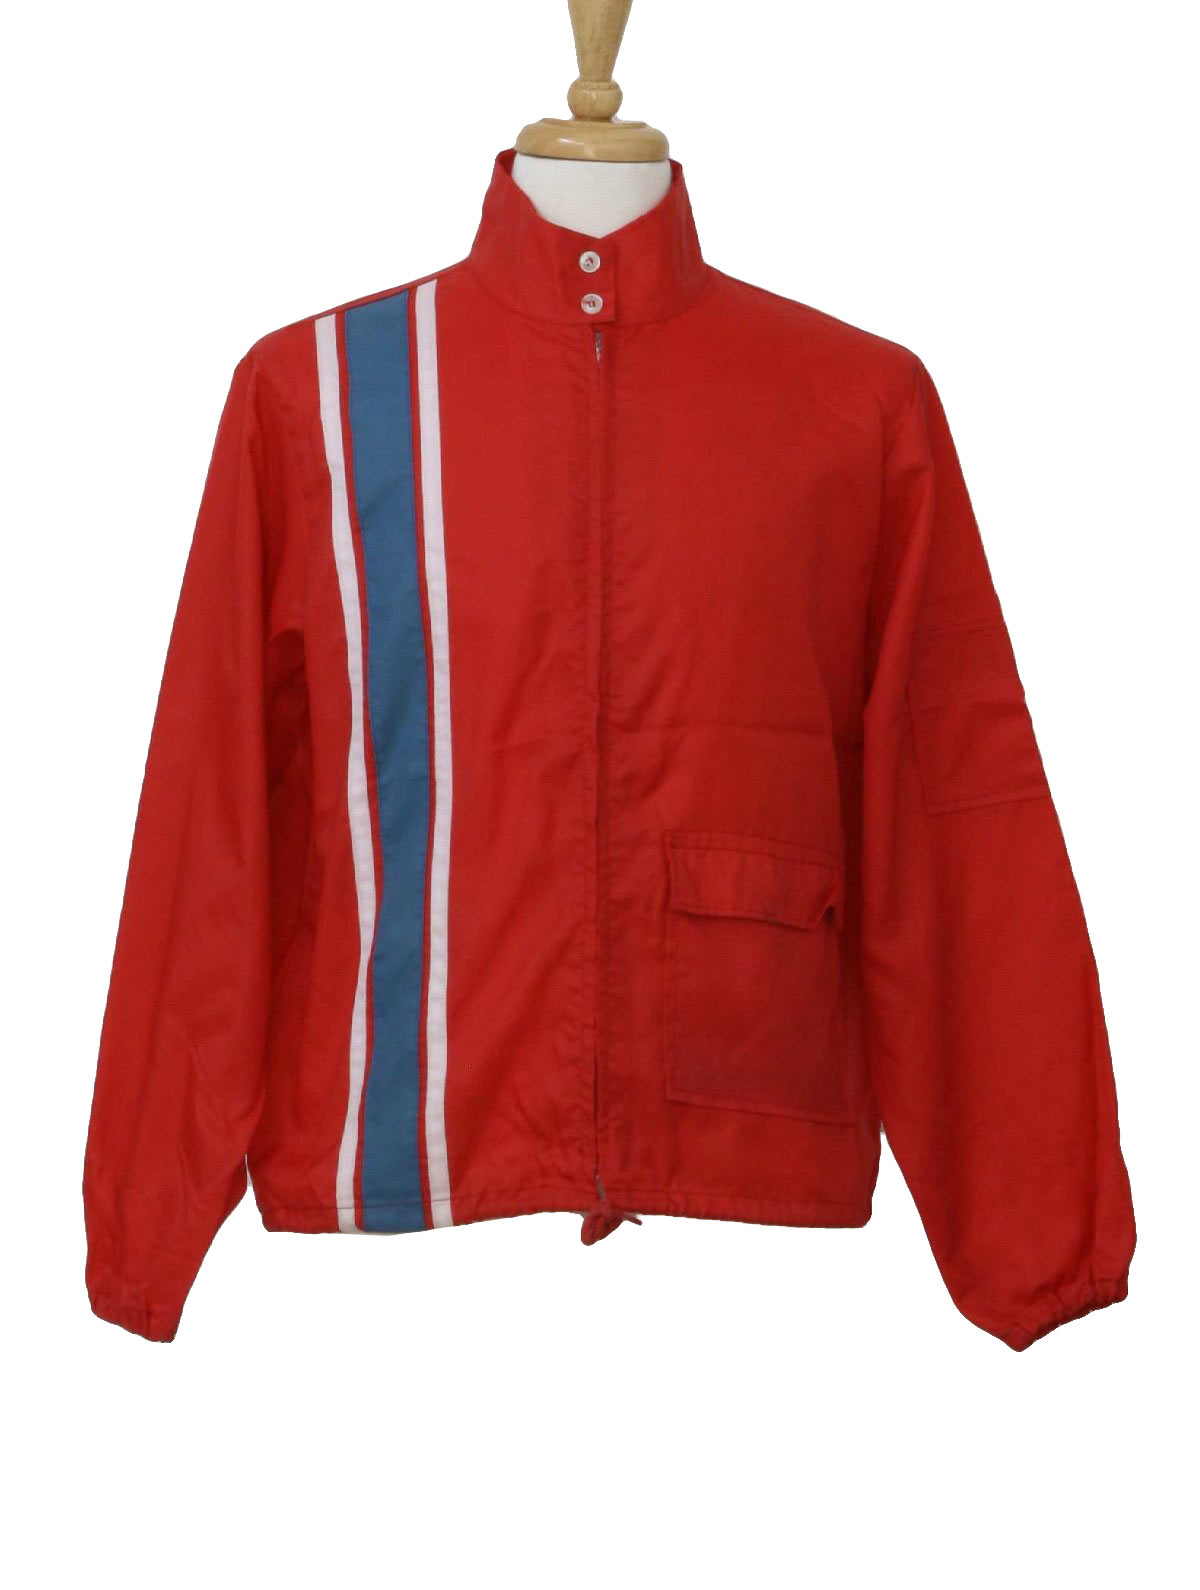 1960's Jacket (Topp Master): 60s -Topp Master- Mens red, white and blue ...